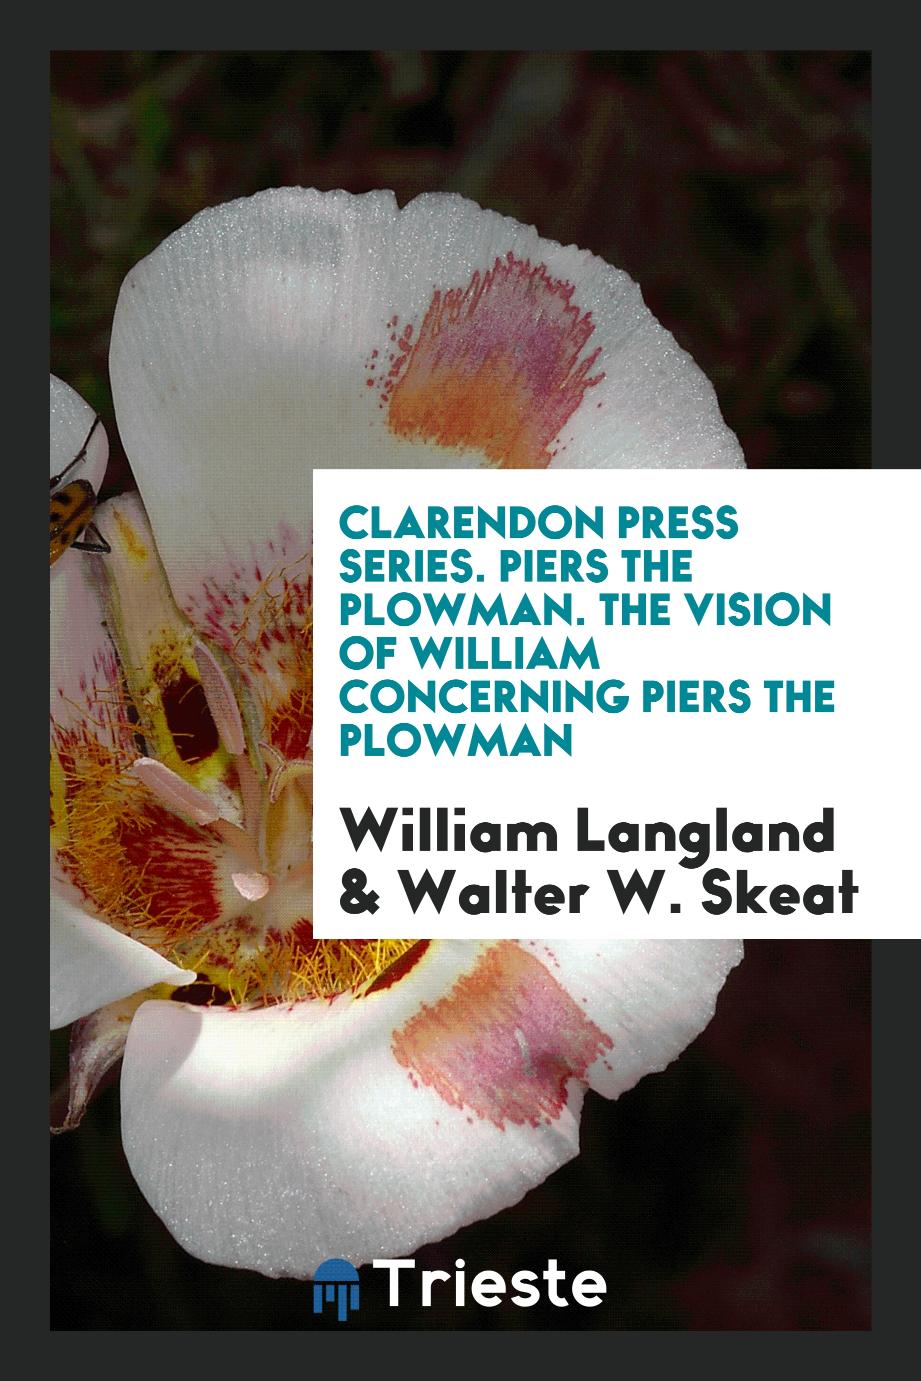 Clarendon Press Series. Piers the Plowman. The Vision of William Concerning Piers the Plowman